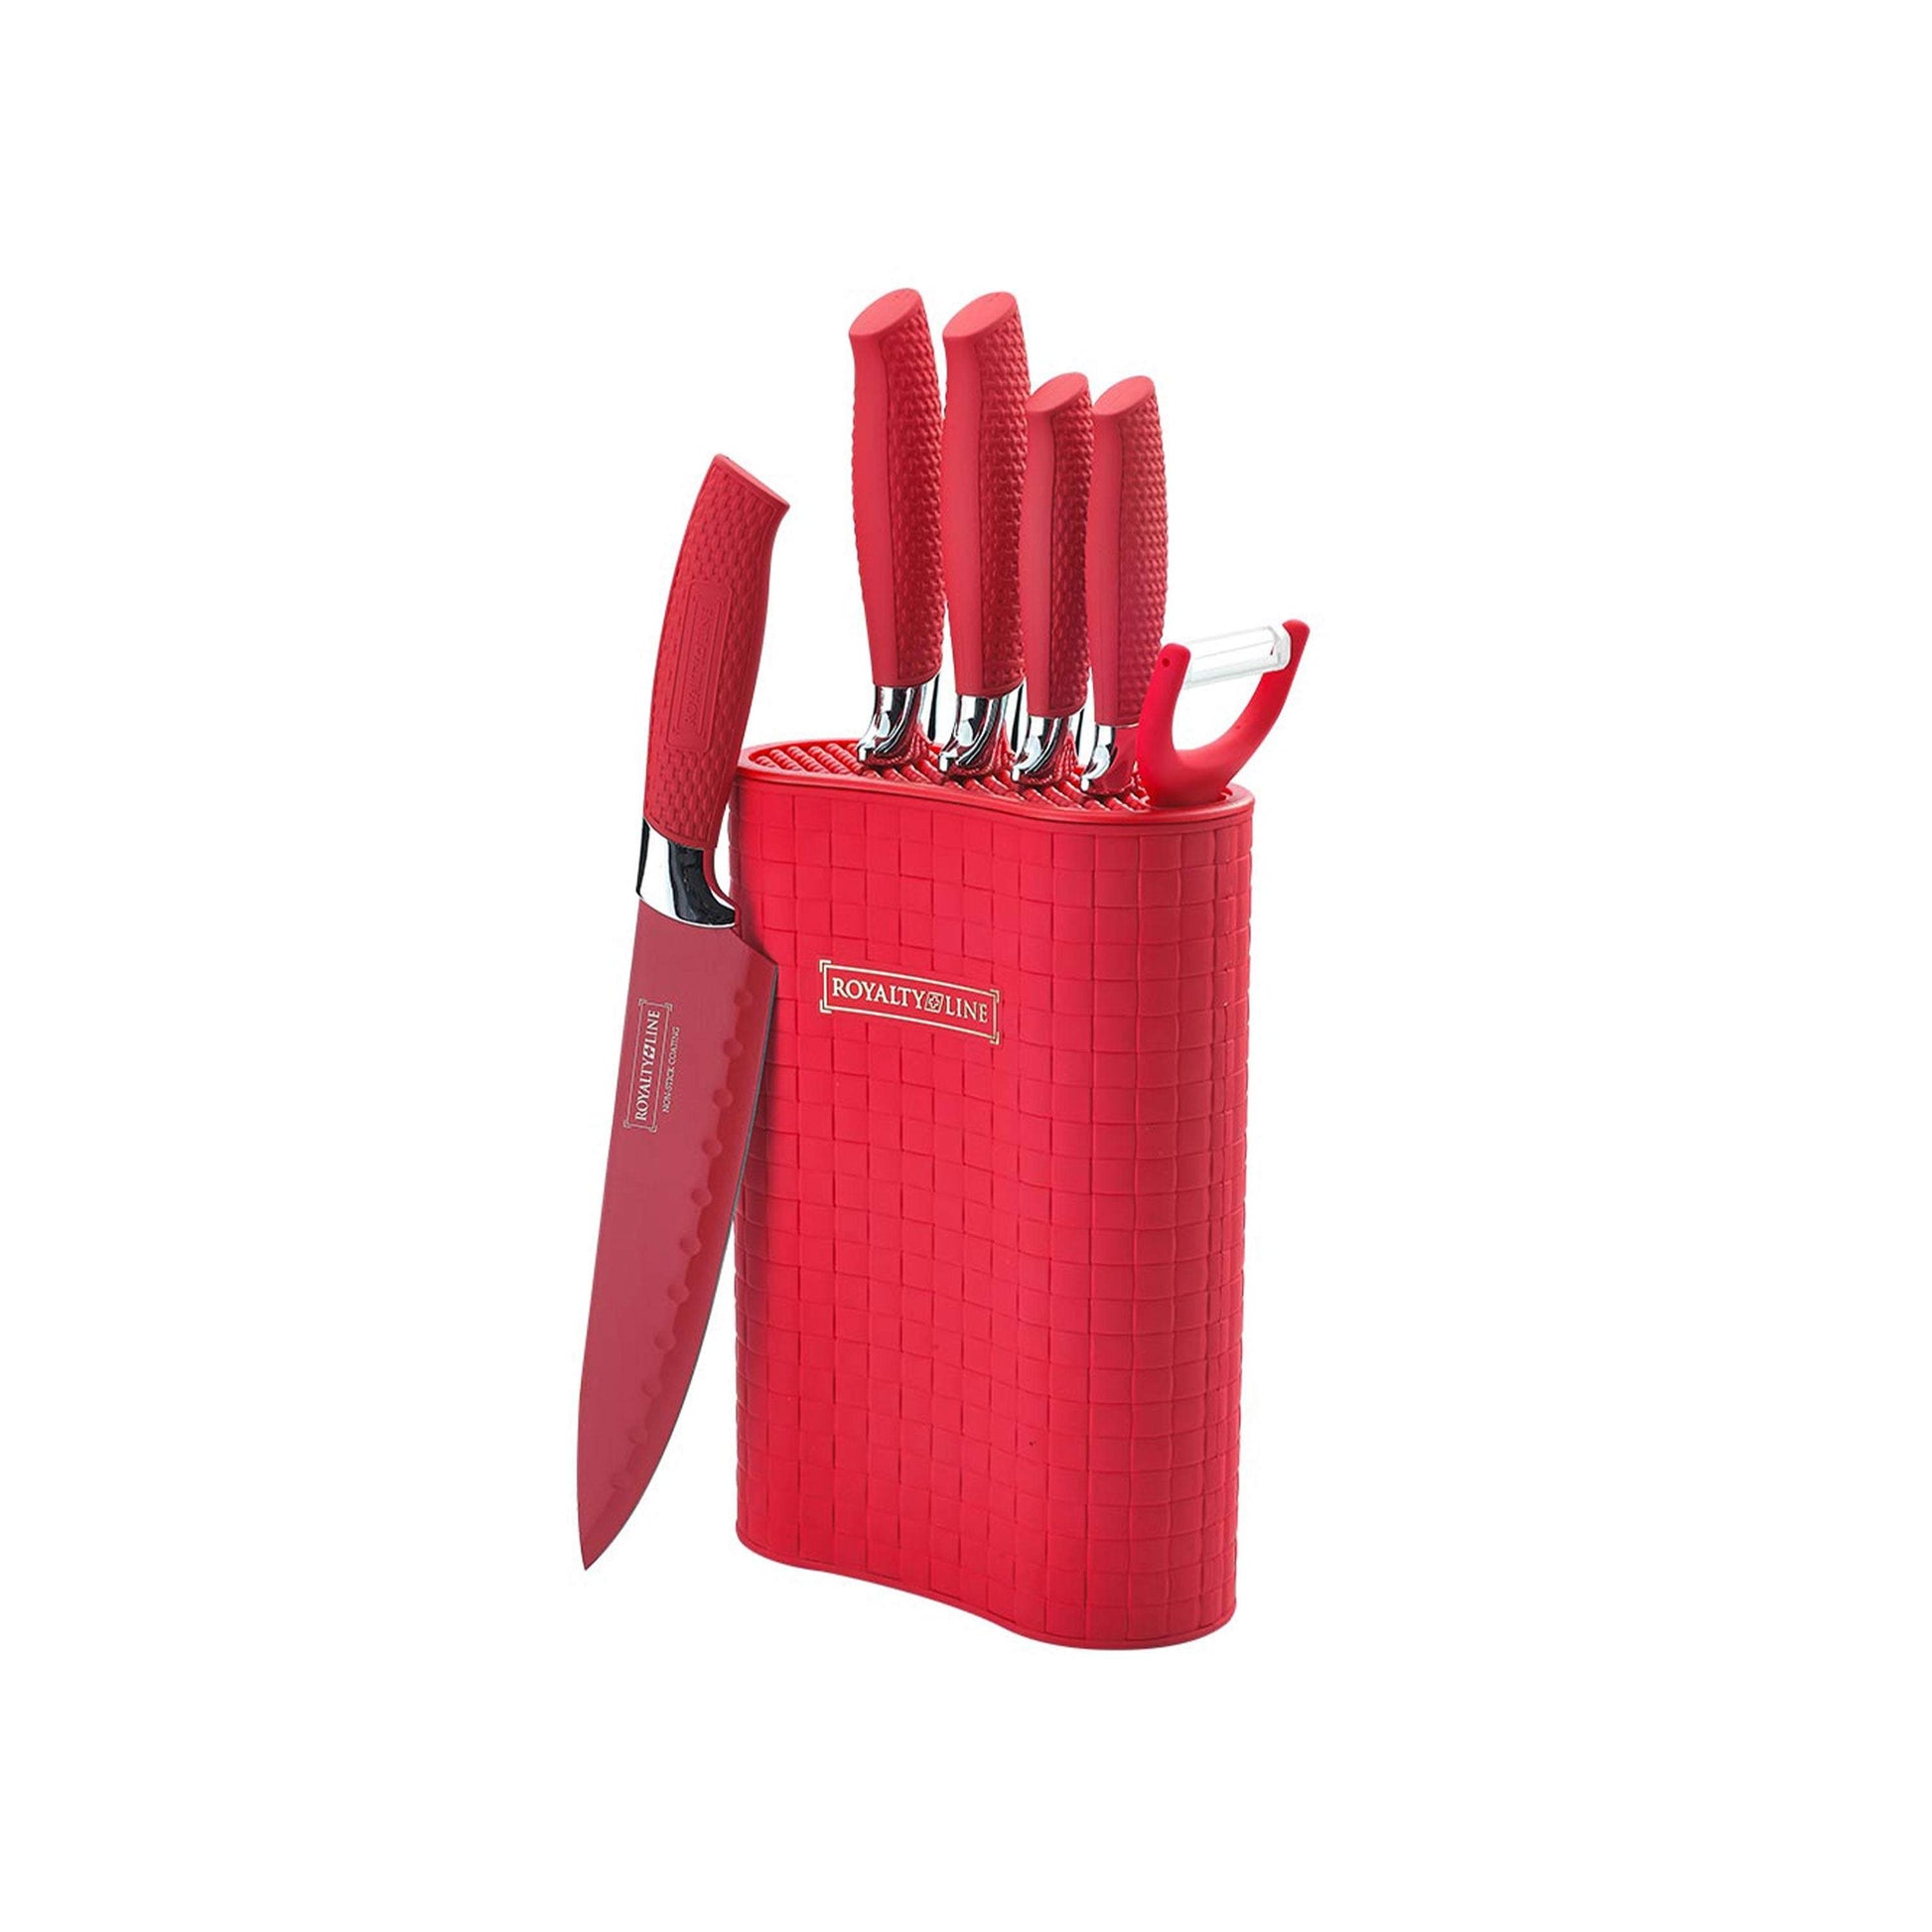 6 Royalty Line Swiss KNIFE SET WITH NON-STICK COATING + STAND-Royal Brands Co-